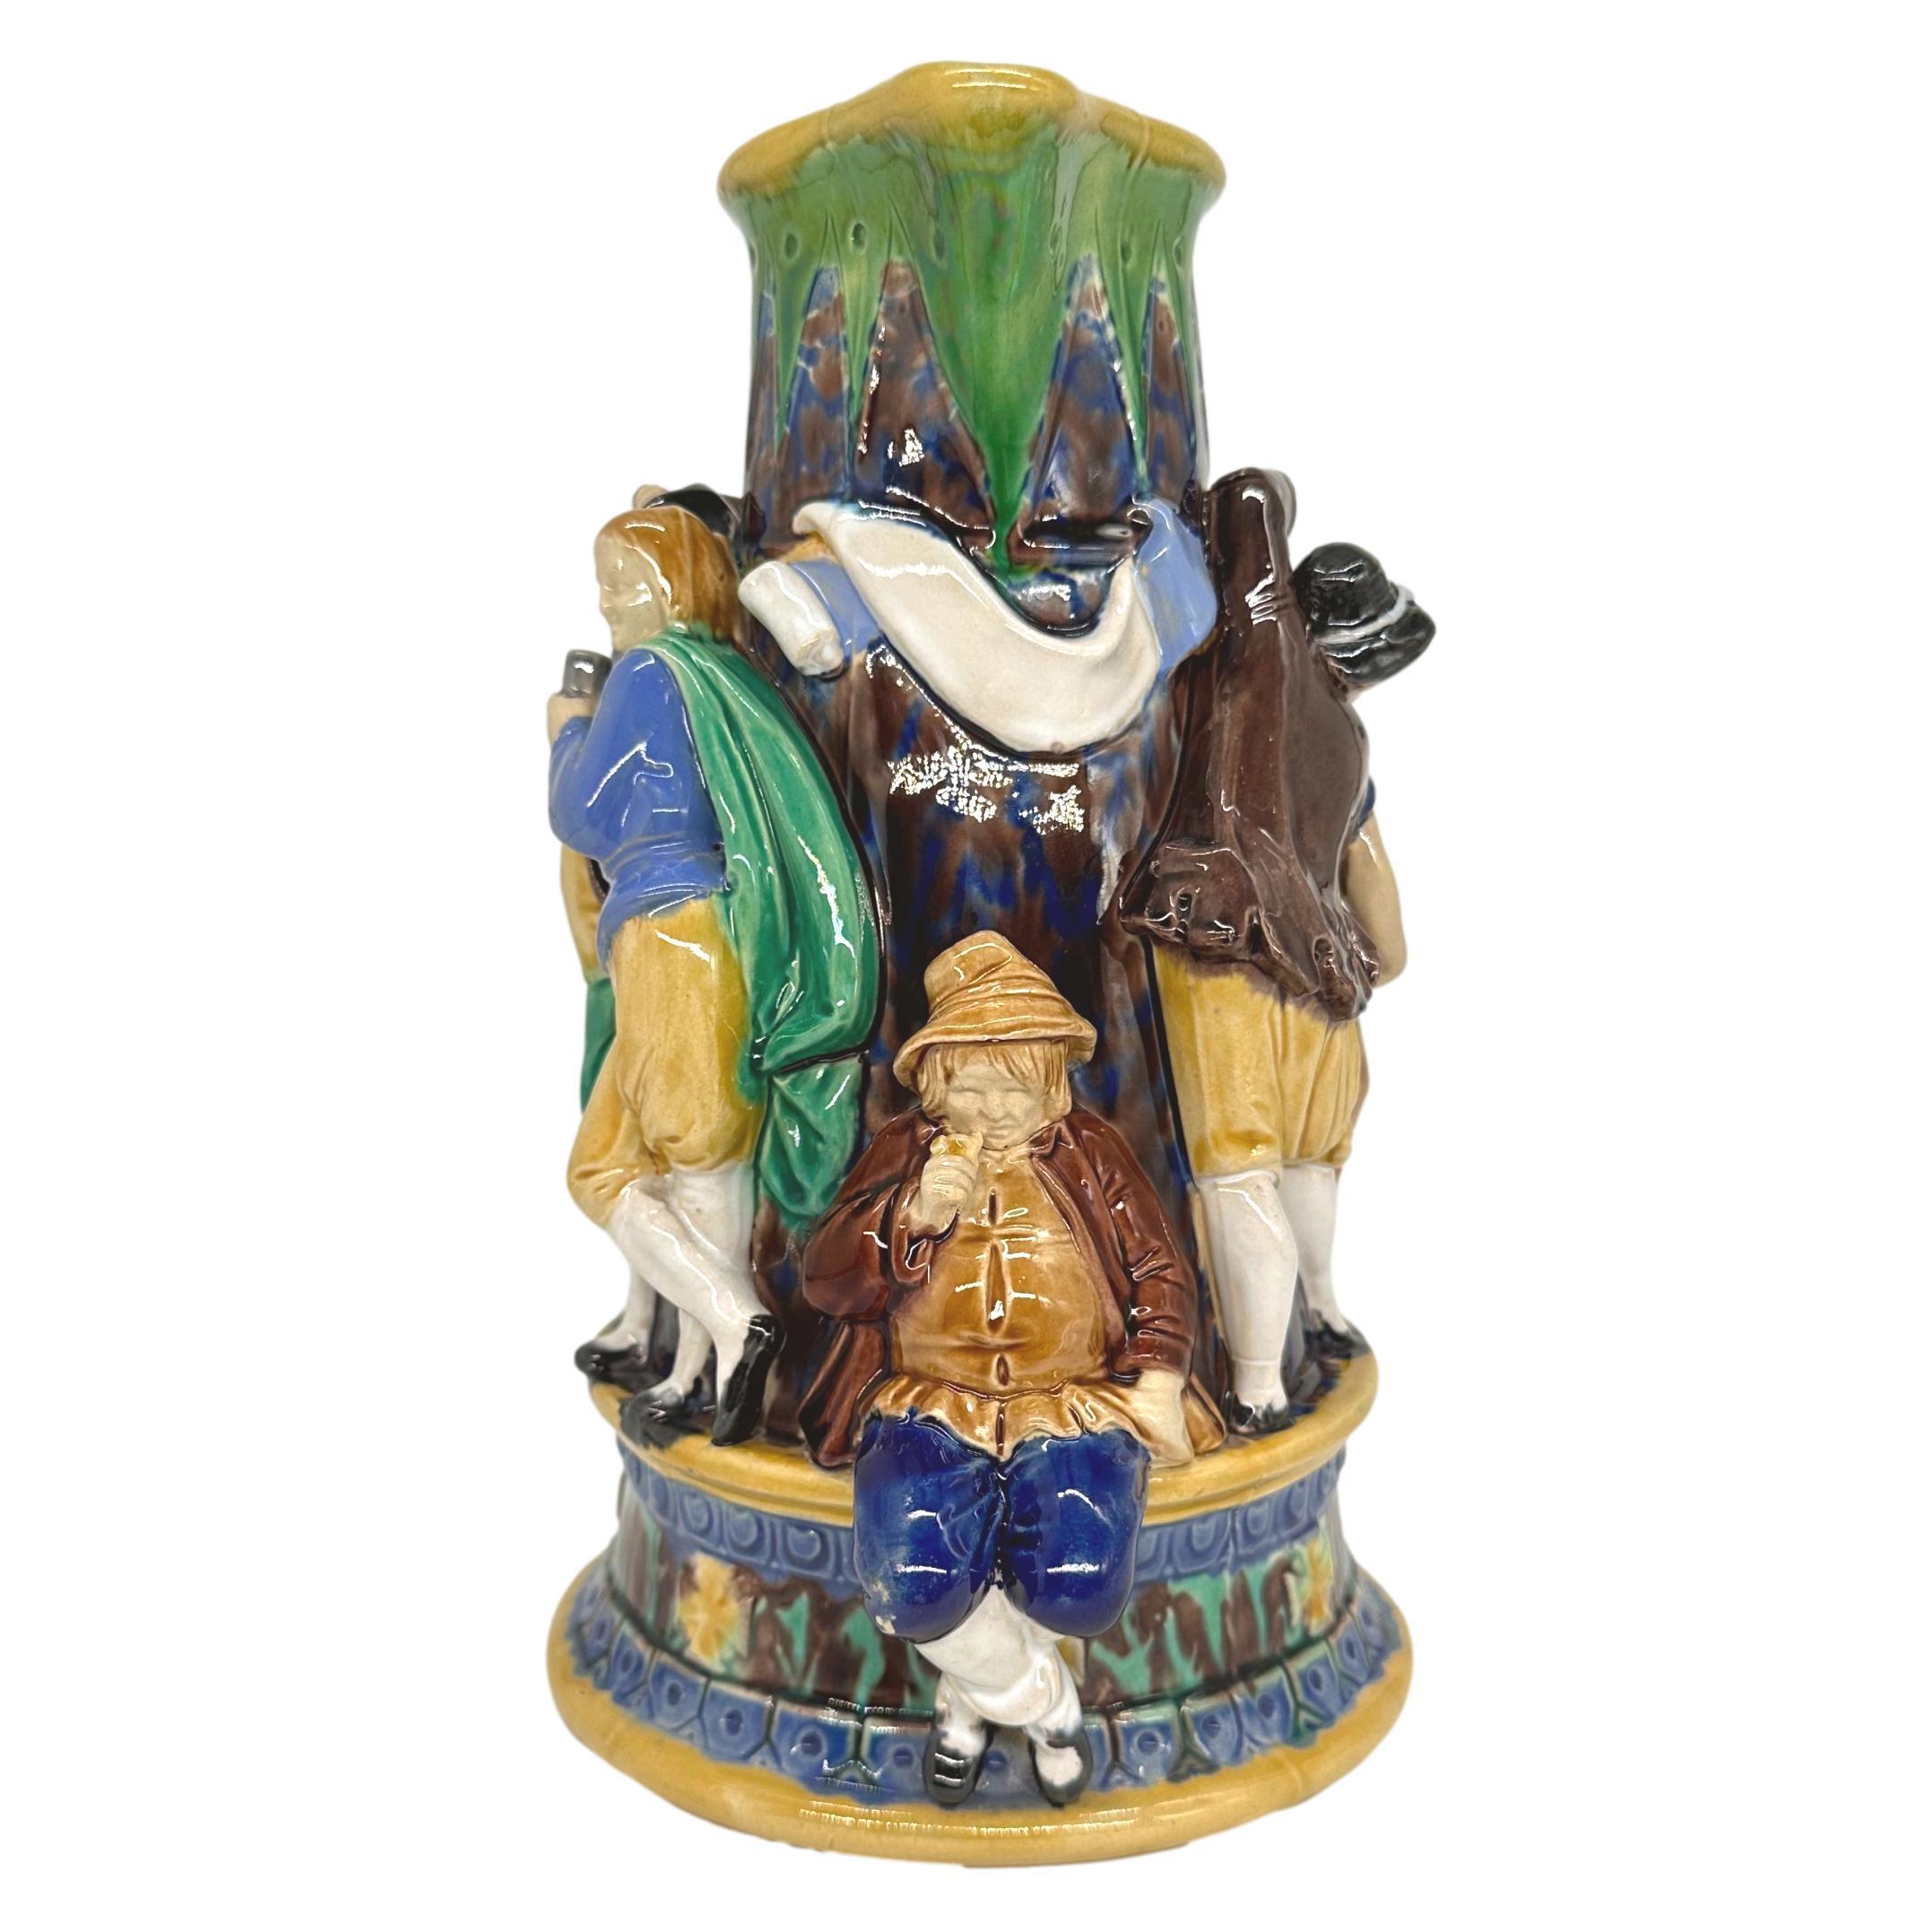 Victorian A Minton Majolica Ale Jug with Five Revelers in Medieval Dress, dated 1862 For Sale